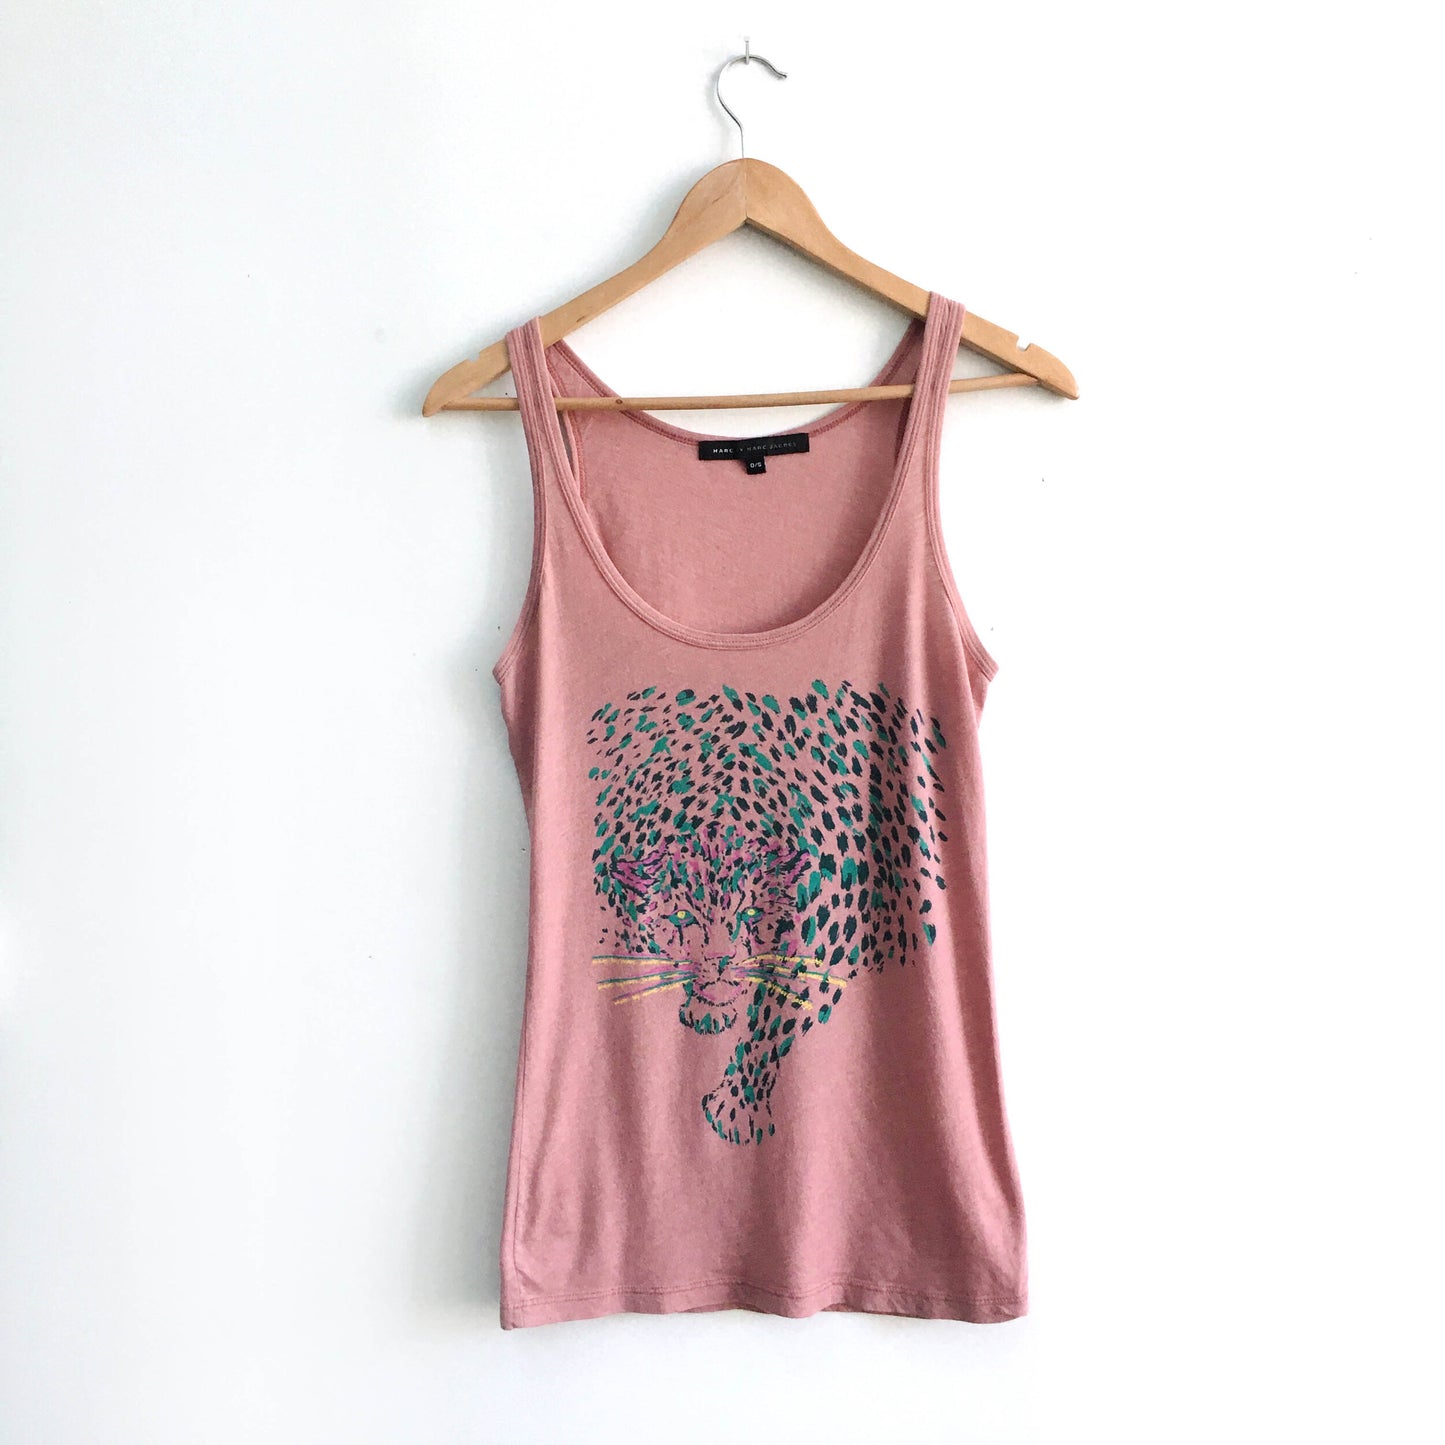 Marc by Marc Jacobs pink leopard tank - size OS